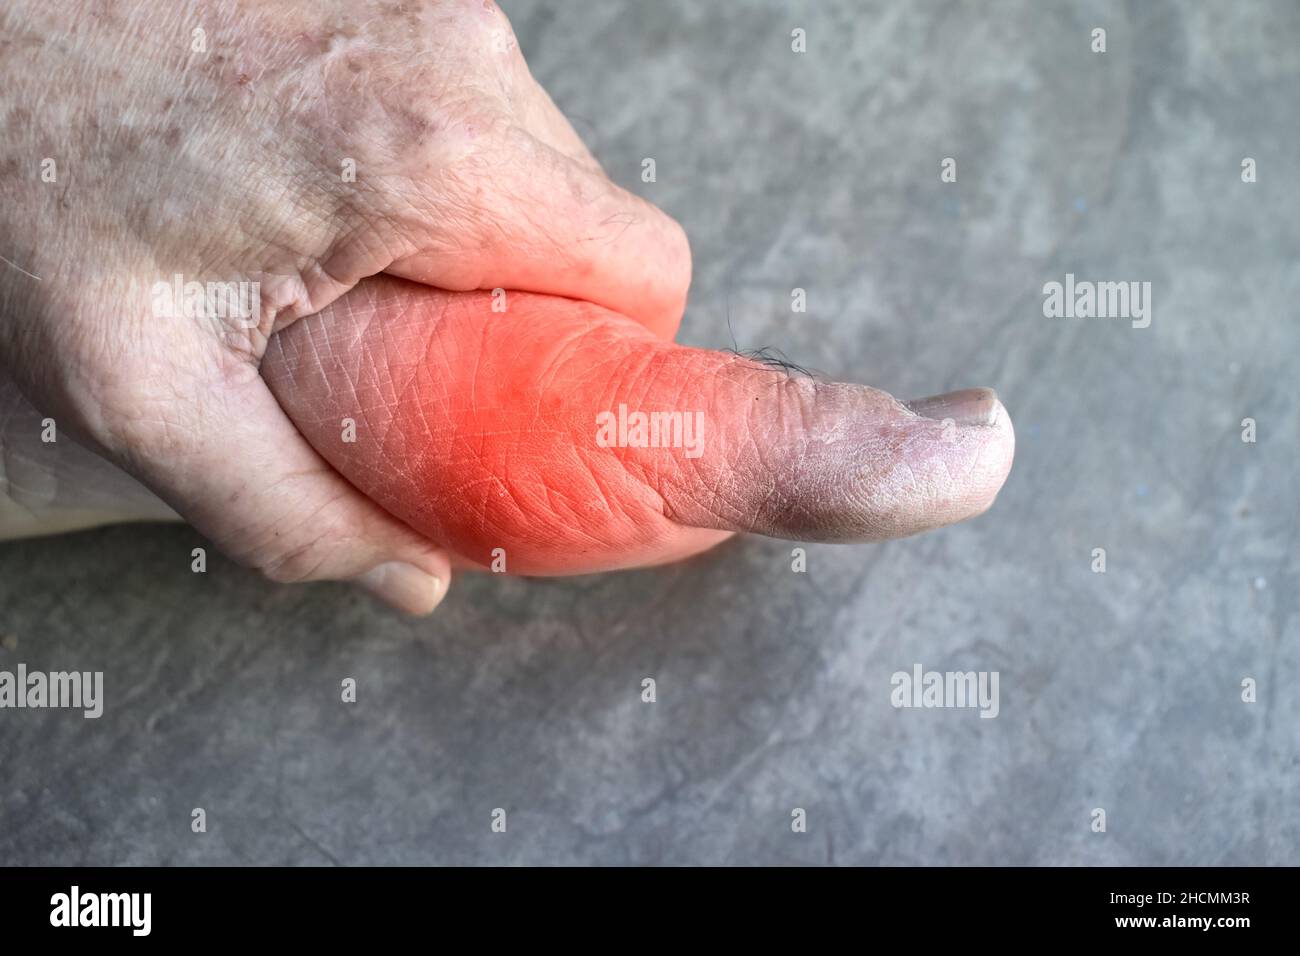 Inflammation of base of big toe. Concept of foot joint pain, arthritis, stumble, hyperuricema or gout. Stock Photo